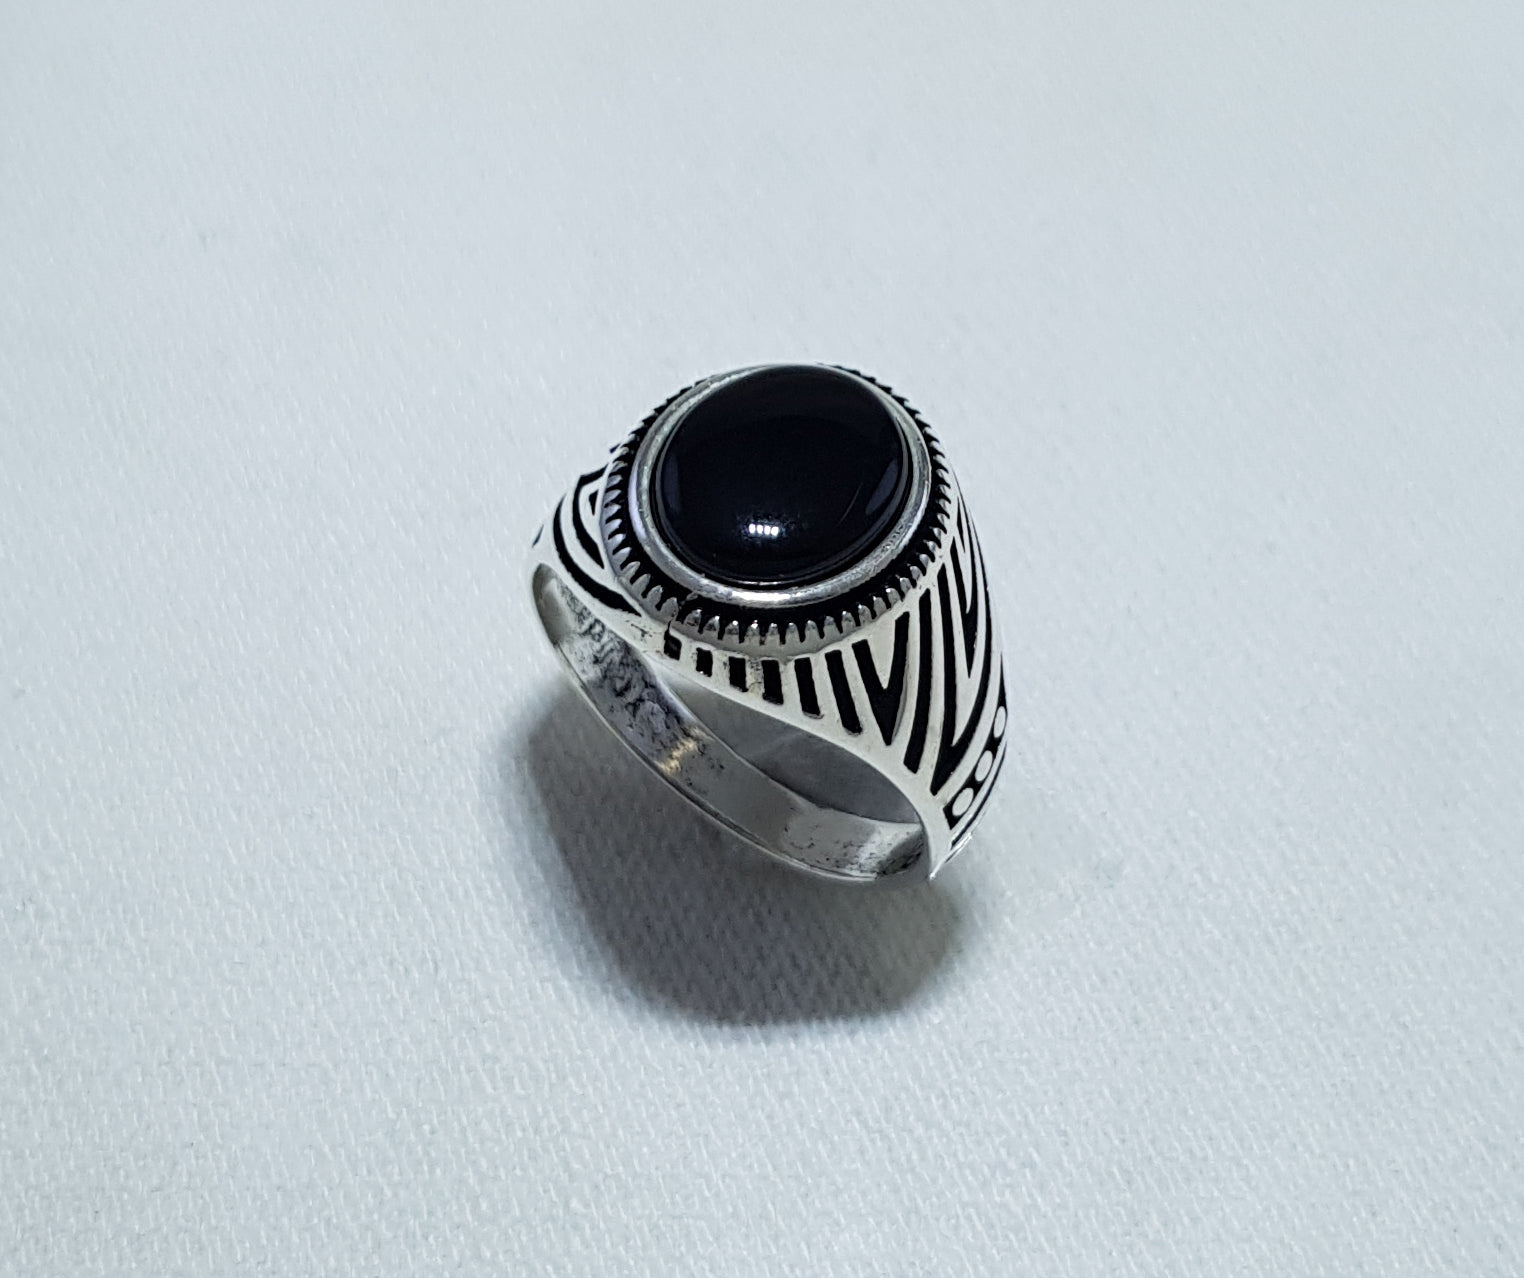 Sterling Silver Ring set with a Genuine Onyx Stone